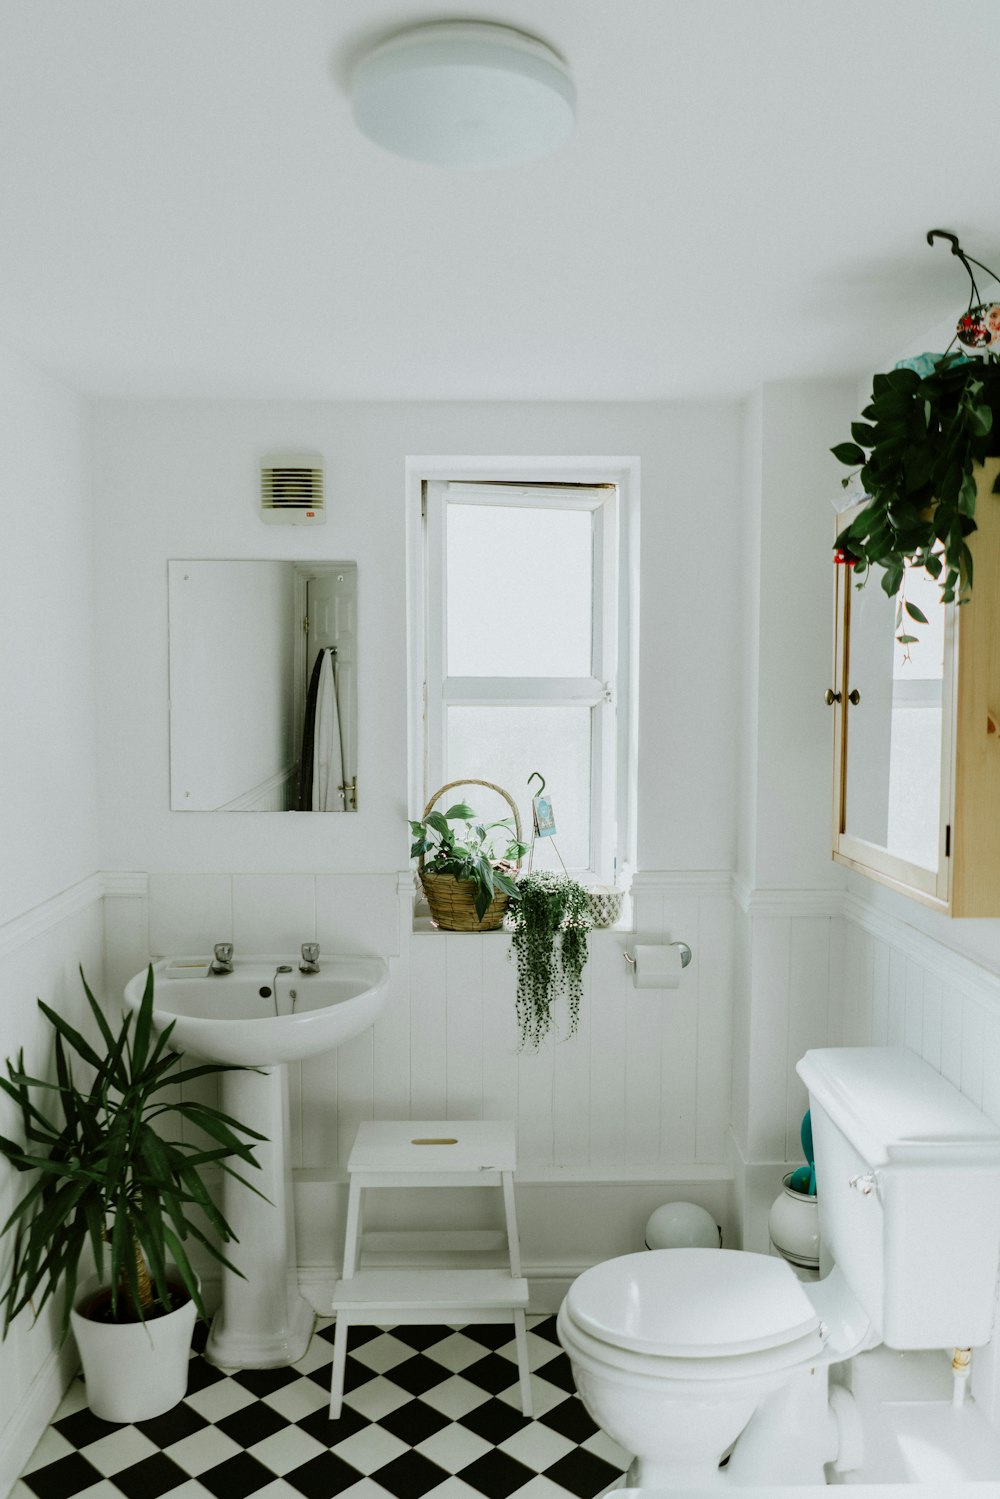 How to Organize Your Bathroom: Ideas to Make Your Tiny Space Seem Larger 1